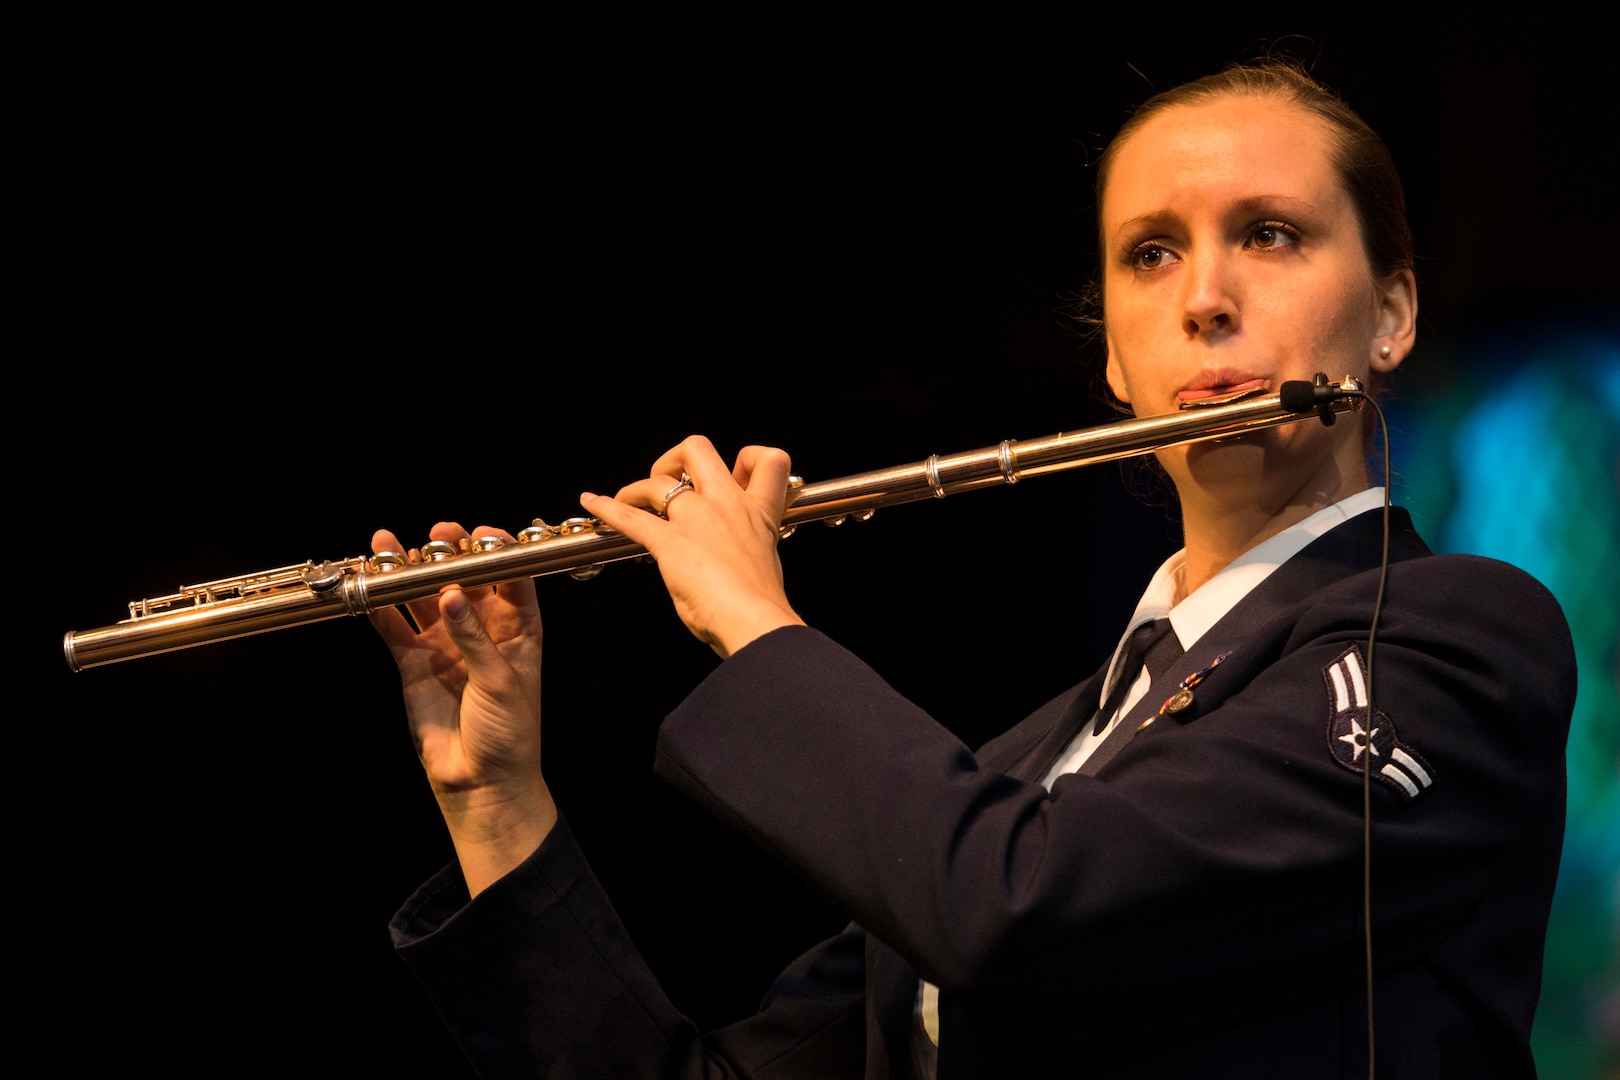 Flutist Airmen 1st Class Elizabeth Robinson, from Band of the West performs as part of Fiesta in Blue in San Antonio, Texas April 24, 2018. The act was dedicated to the 300th Anniversary of San Antonio and honors the city's military heritage. Since 1891, Fiesta has grown into an annual celebration that includes civic and military observances, exhibits, sports, music and food representing the spirit, diversity and vitality of San Antonio. (U.S. Air Force photo by Ismael Ortega / Released)